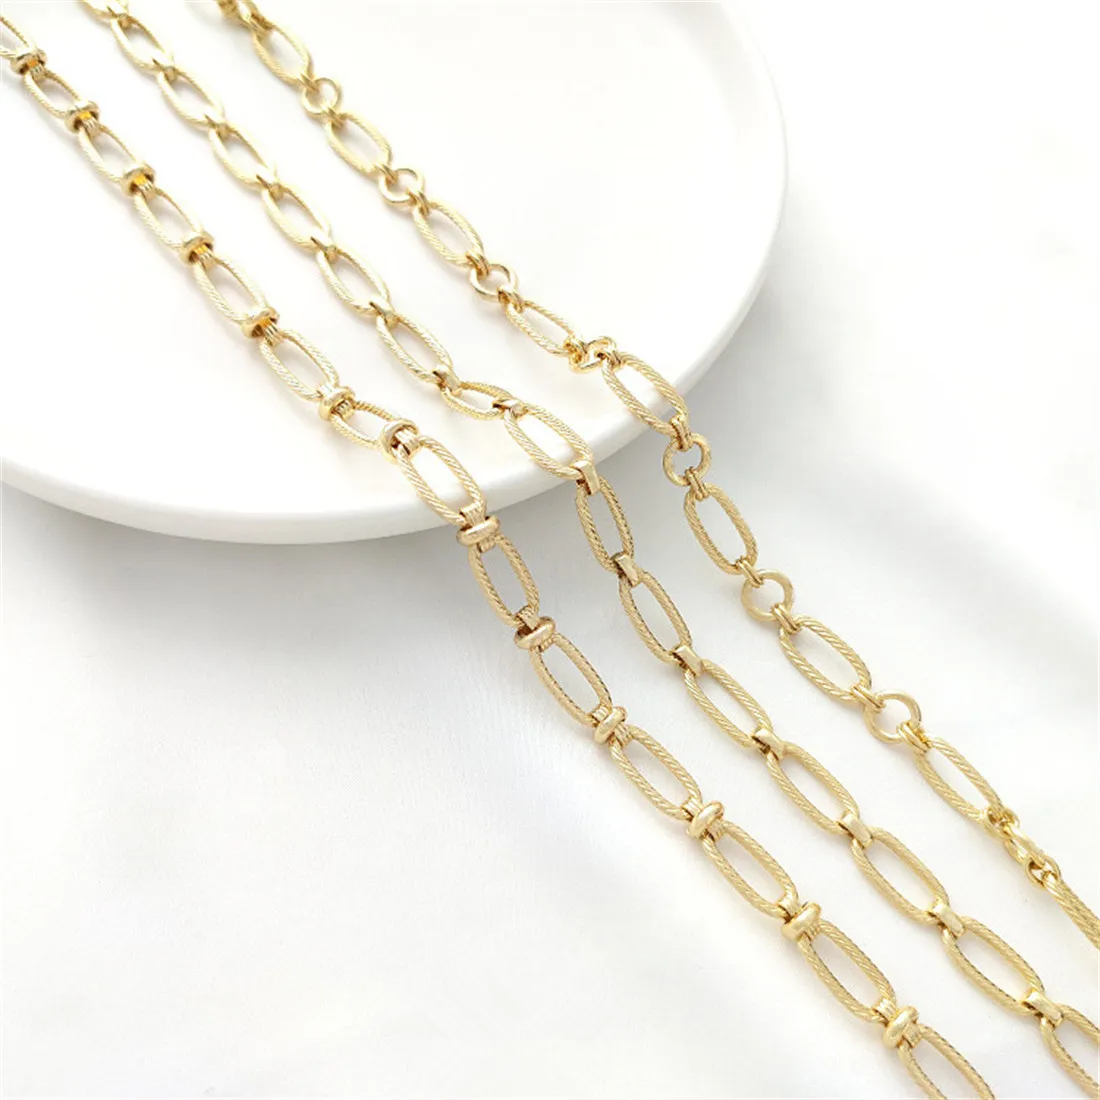 14K Gold Wrapped Oval Fried Dough Twists Chain Manual Long O-ring Chain Diy Bracelet Necklace Jewelry Hand Made Loose Chain B671 1000pcs 10mm 30mm gray adhesive scratch off sticker diy manual hand made scratch card